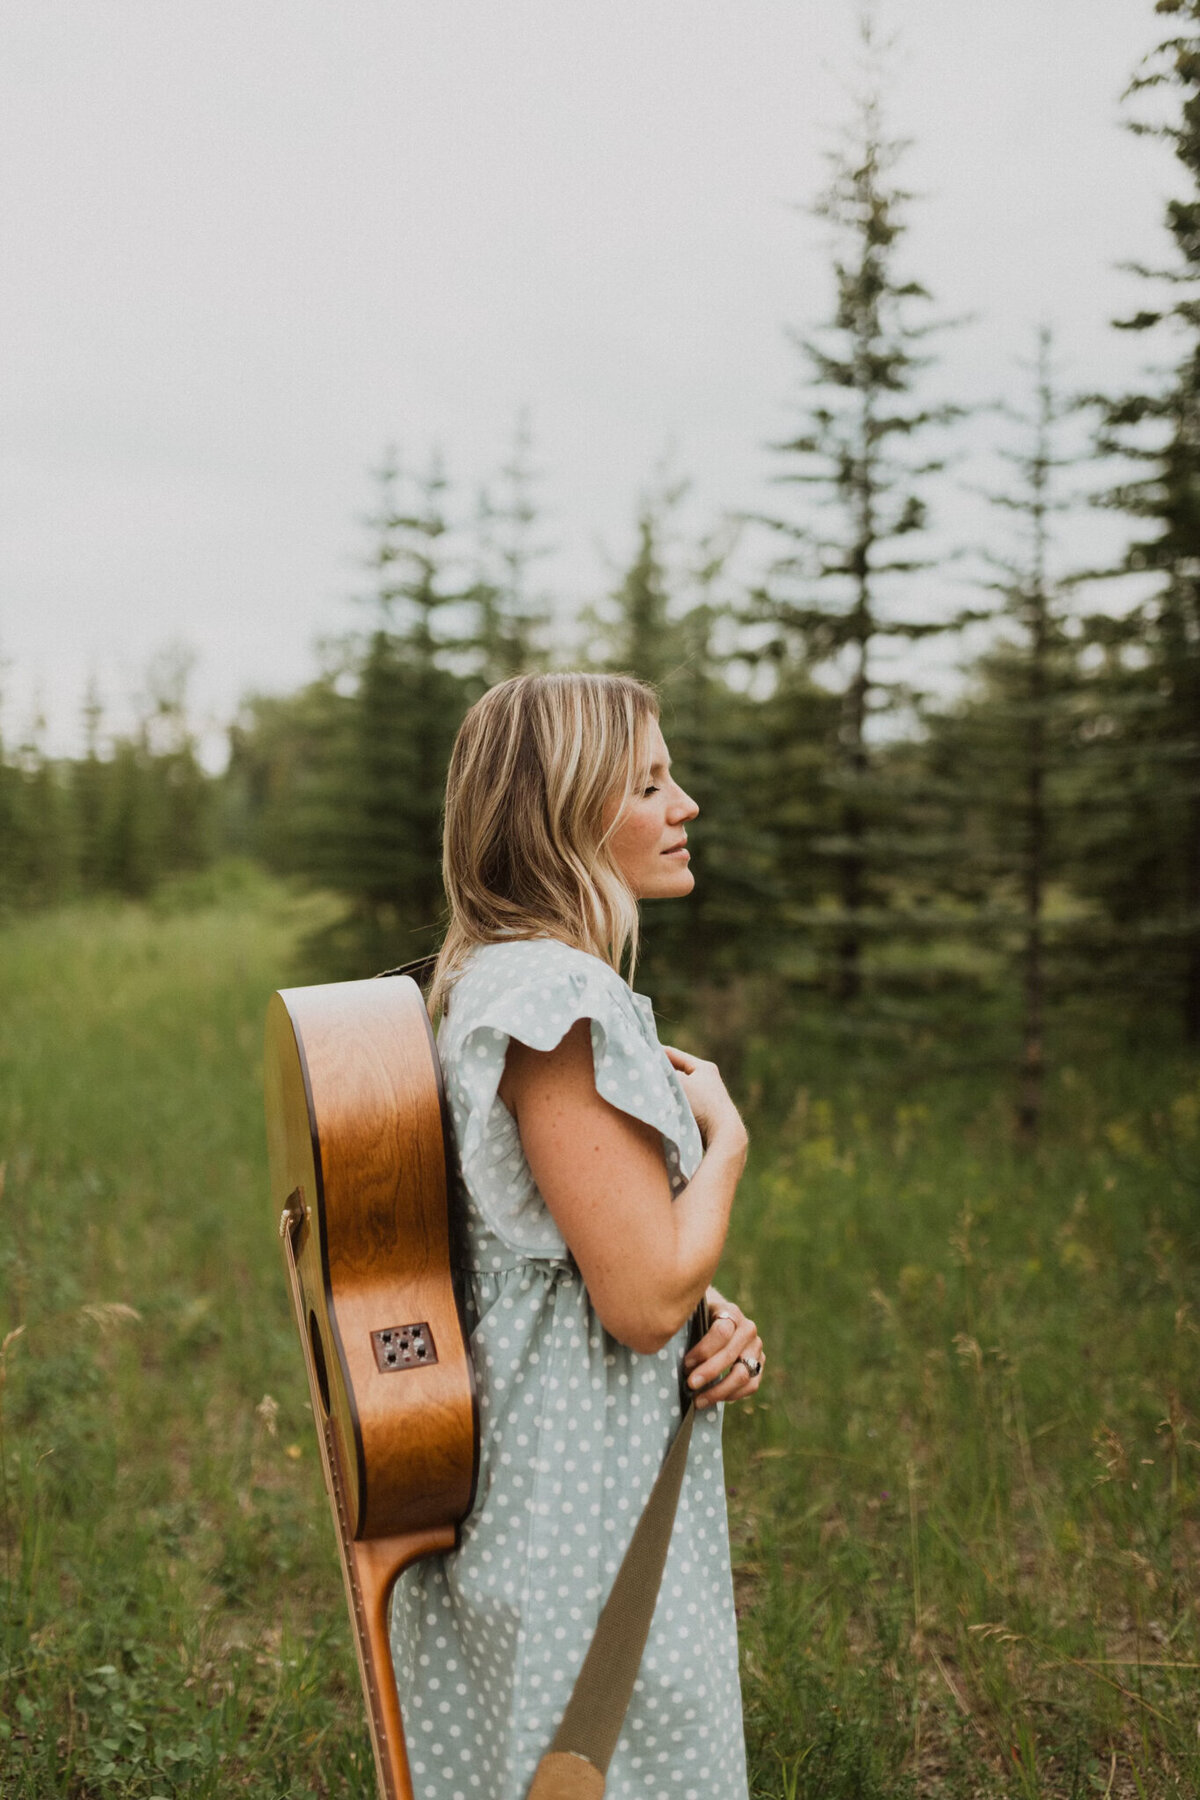 Alice Jane Music, a folk inspired live acoustic wedding musician based in Calgary, BC. Featured on the Brontë Bride Vendor Guide.